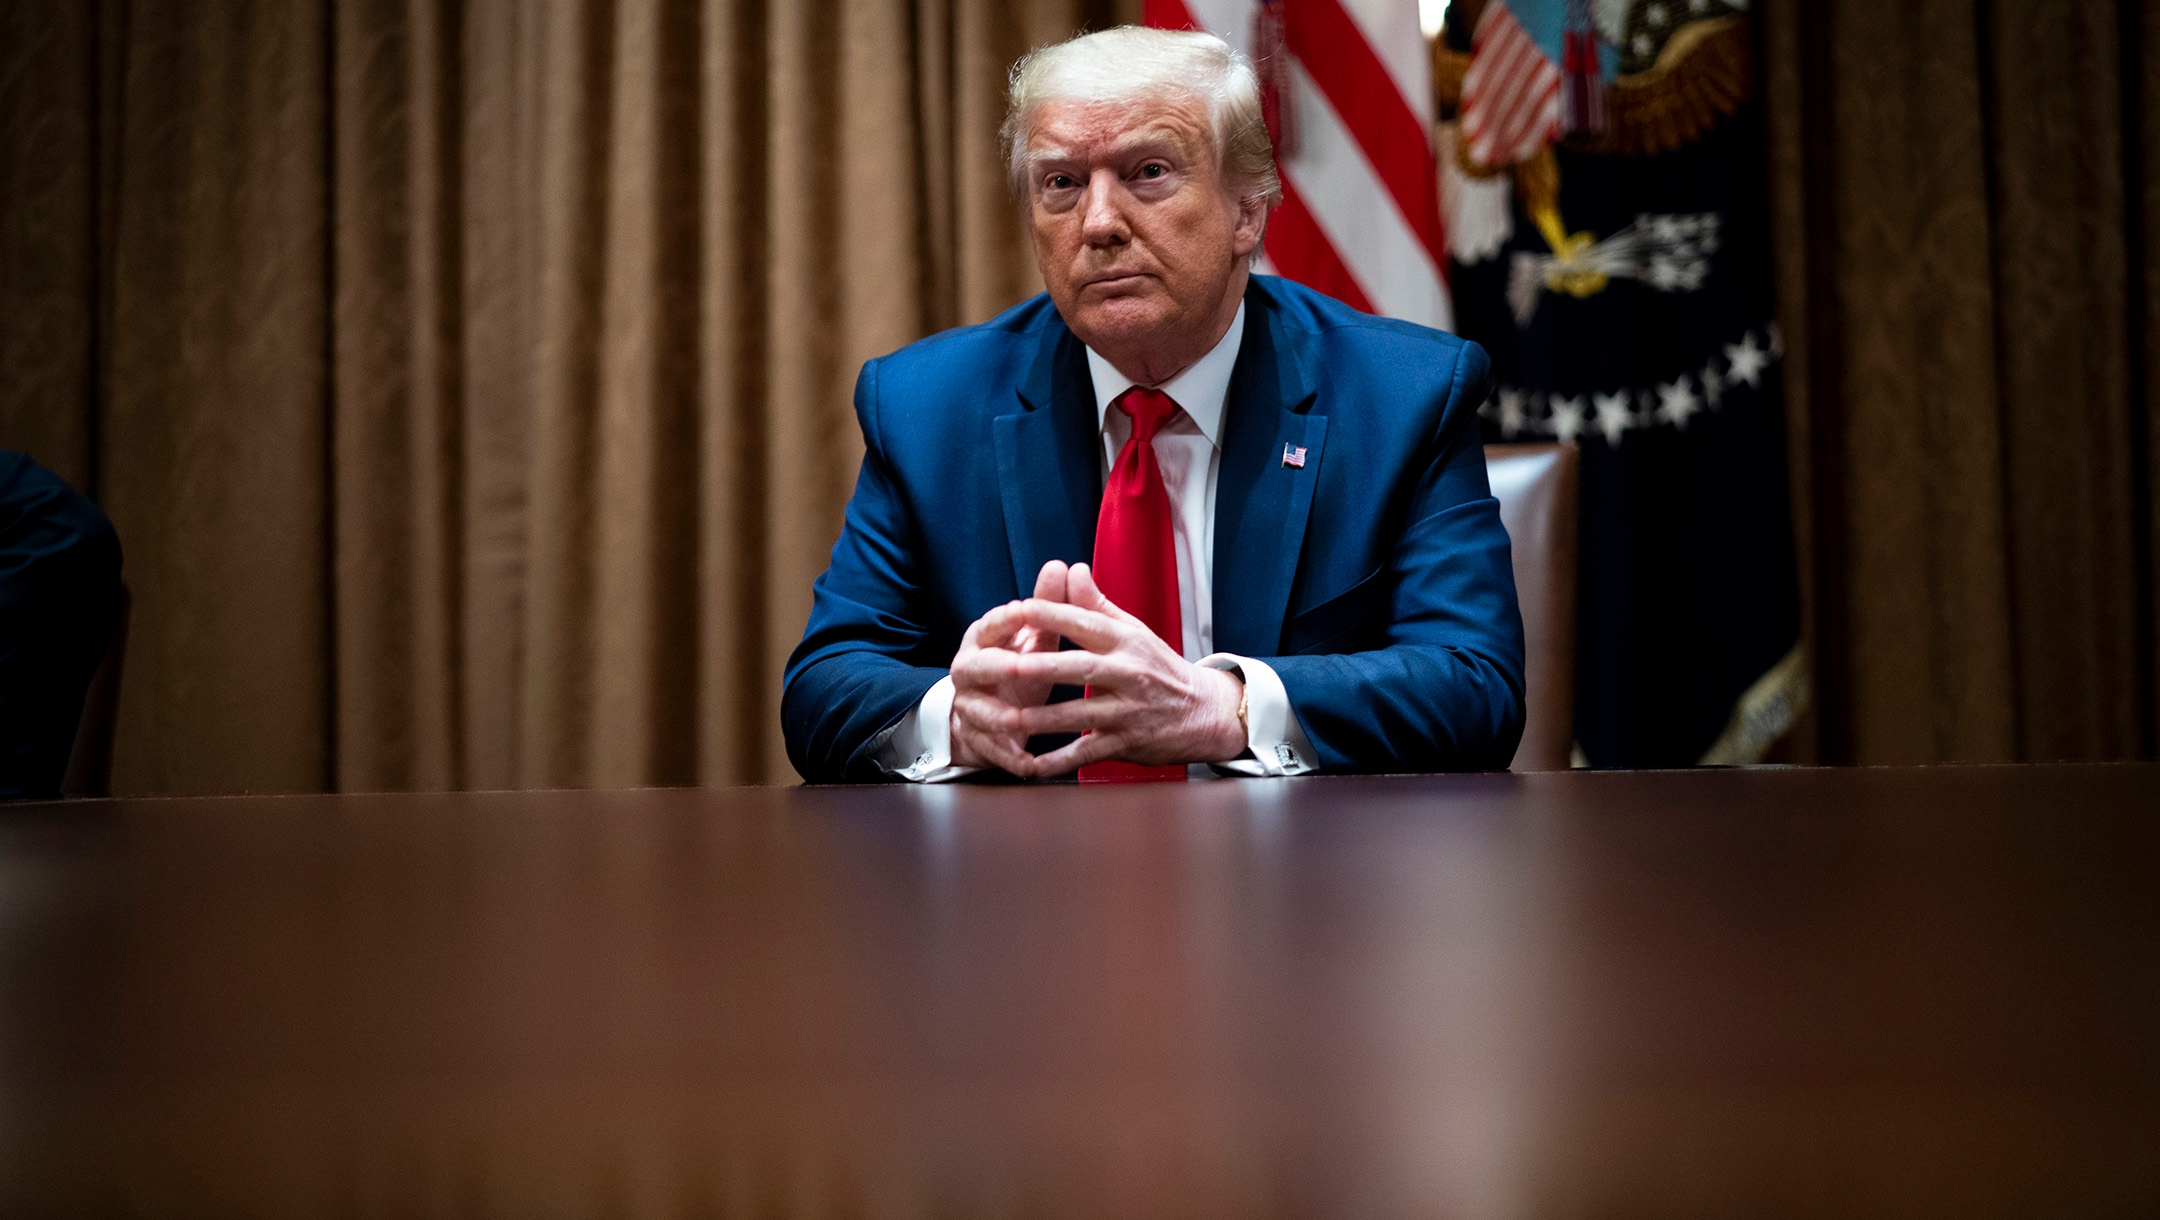 President Donald Trump speaks during a round table discussion with African American supporters in the Cabinet Room of the White House in Washington, DC on June 10, 2020. (Doug Mills-Pool/Getty Images)